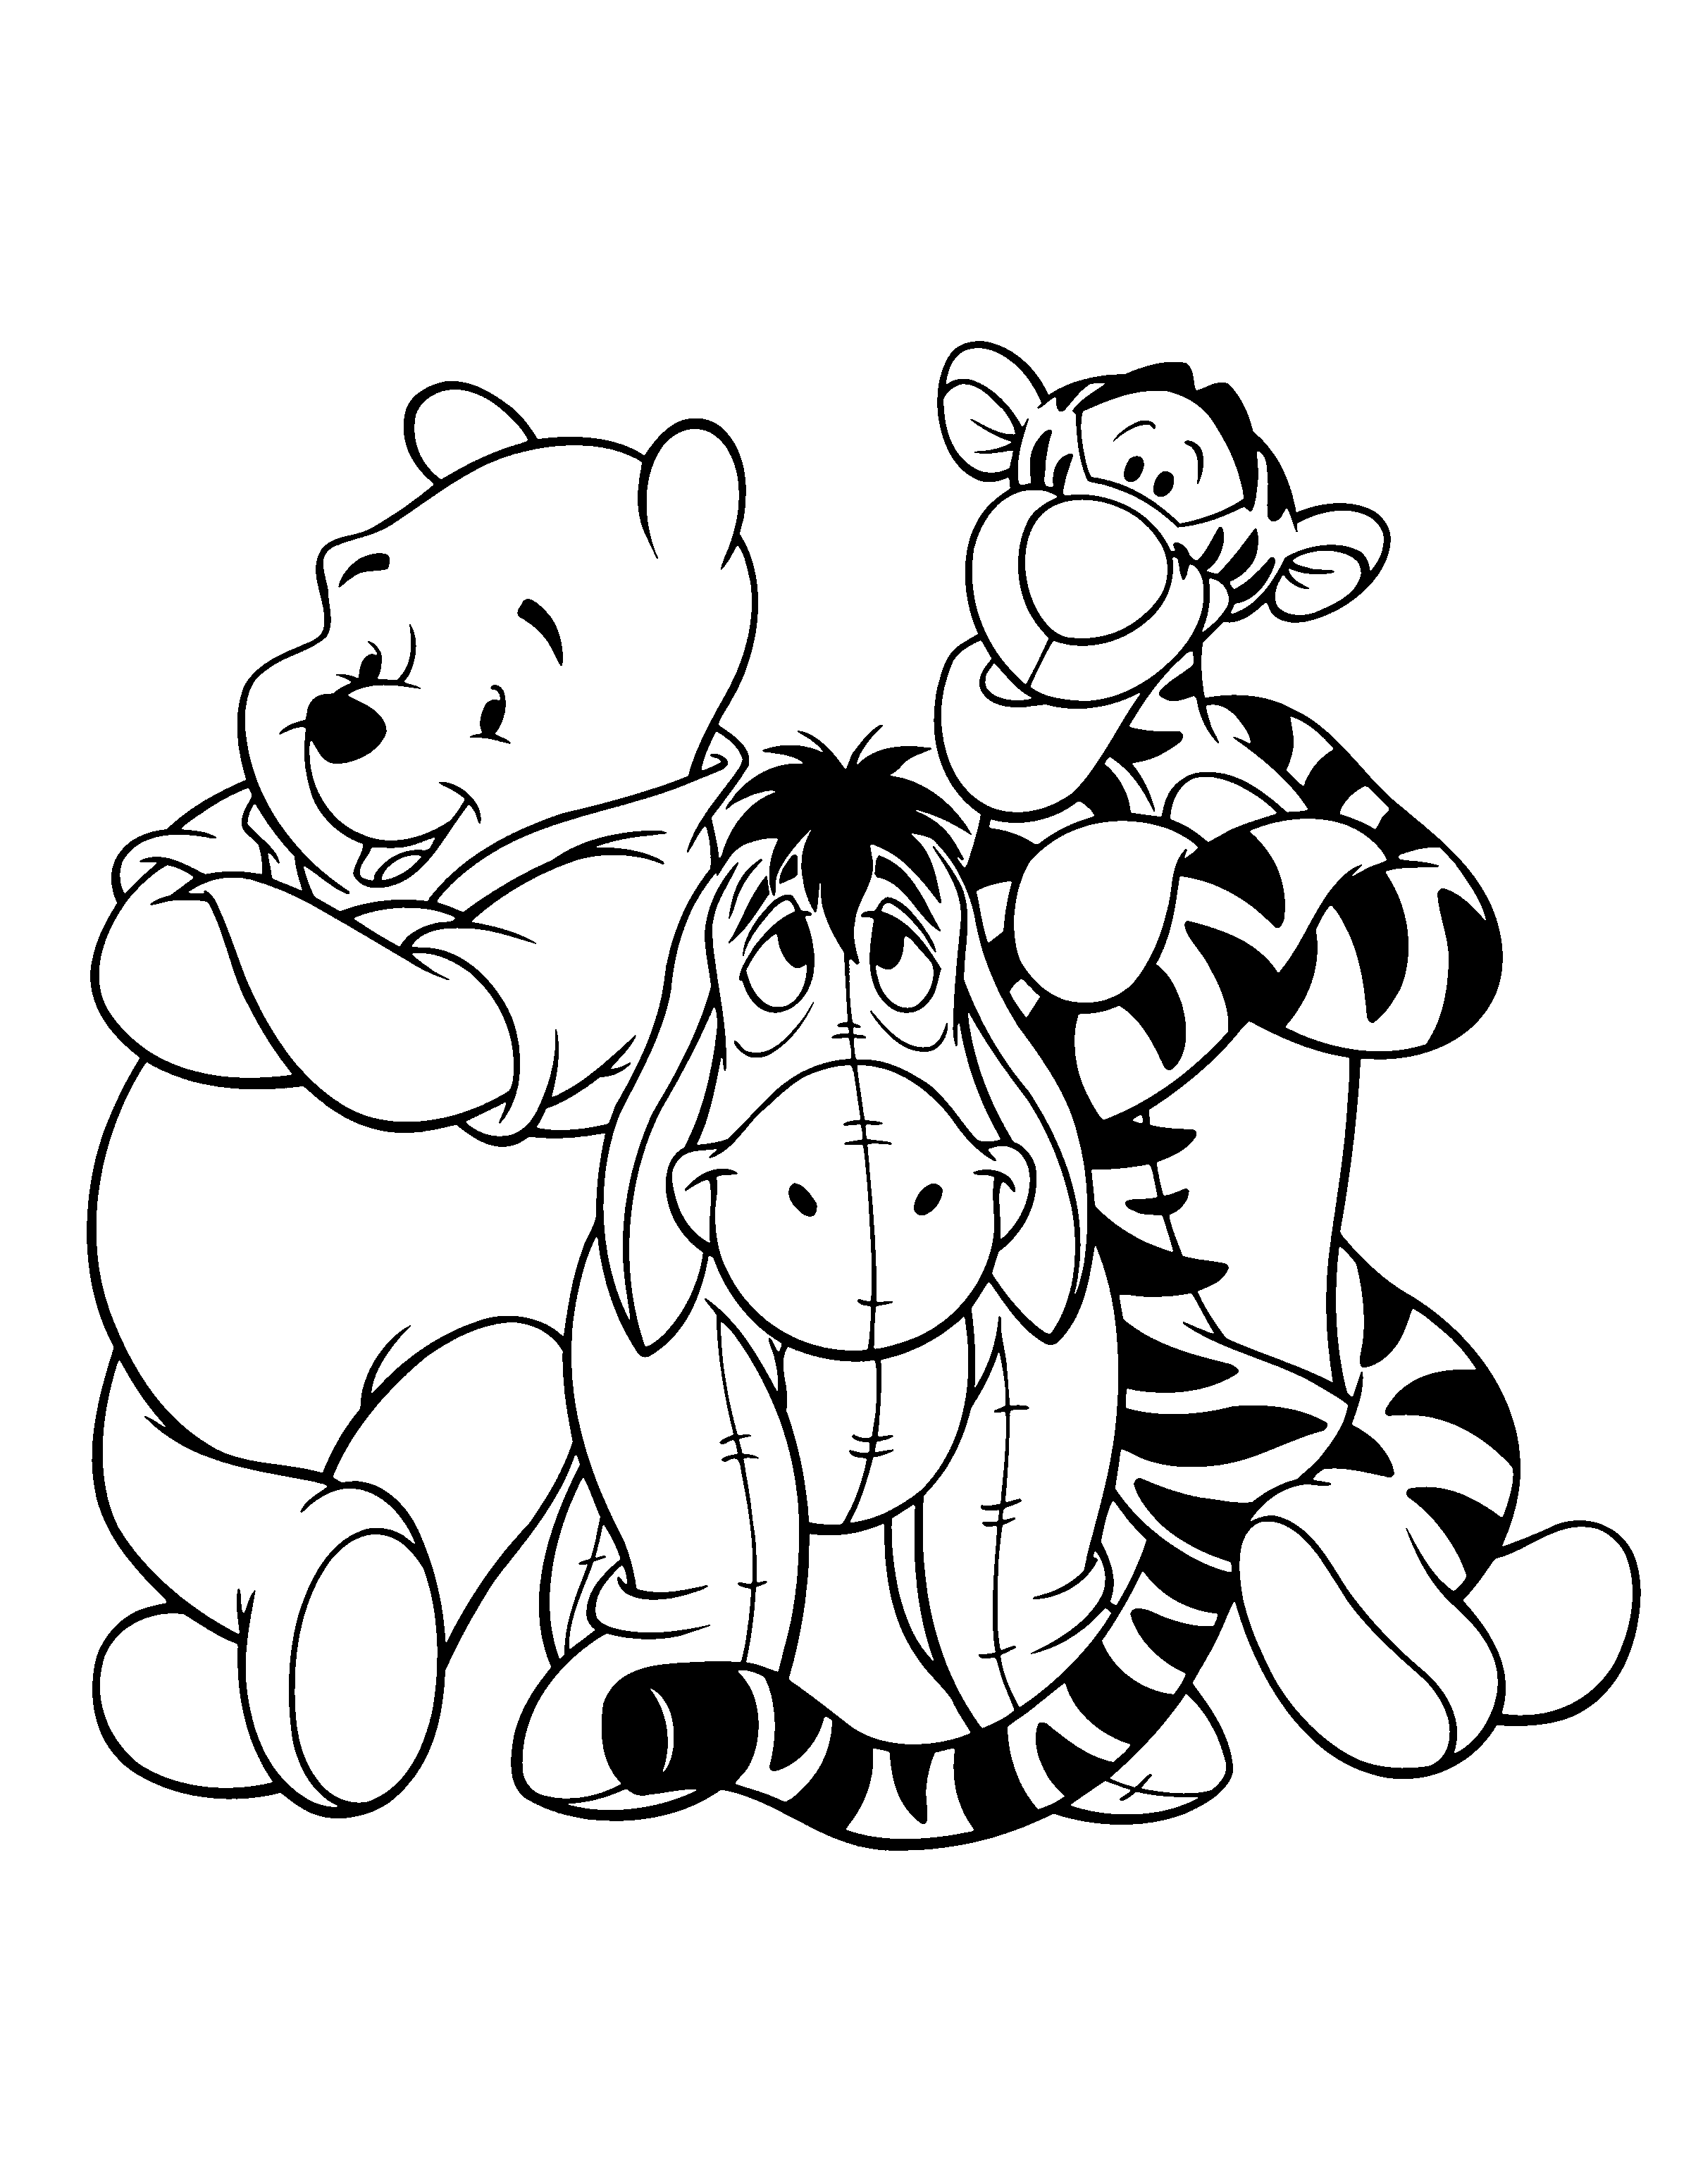 Coloring Page - Winnie the pooh coloring pages 60